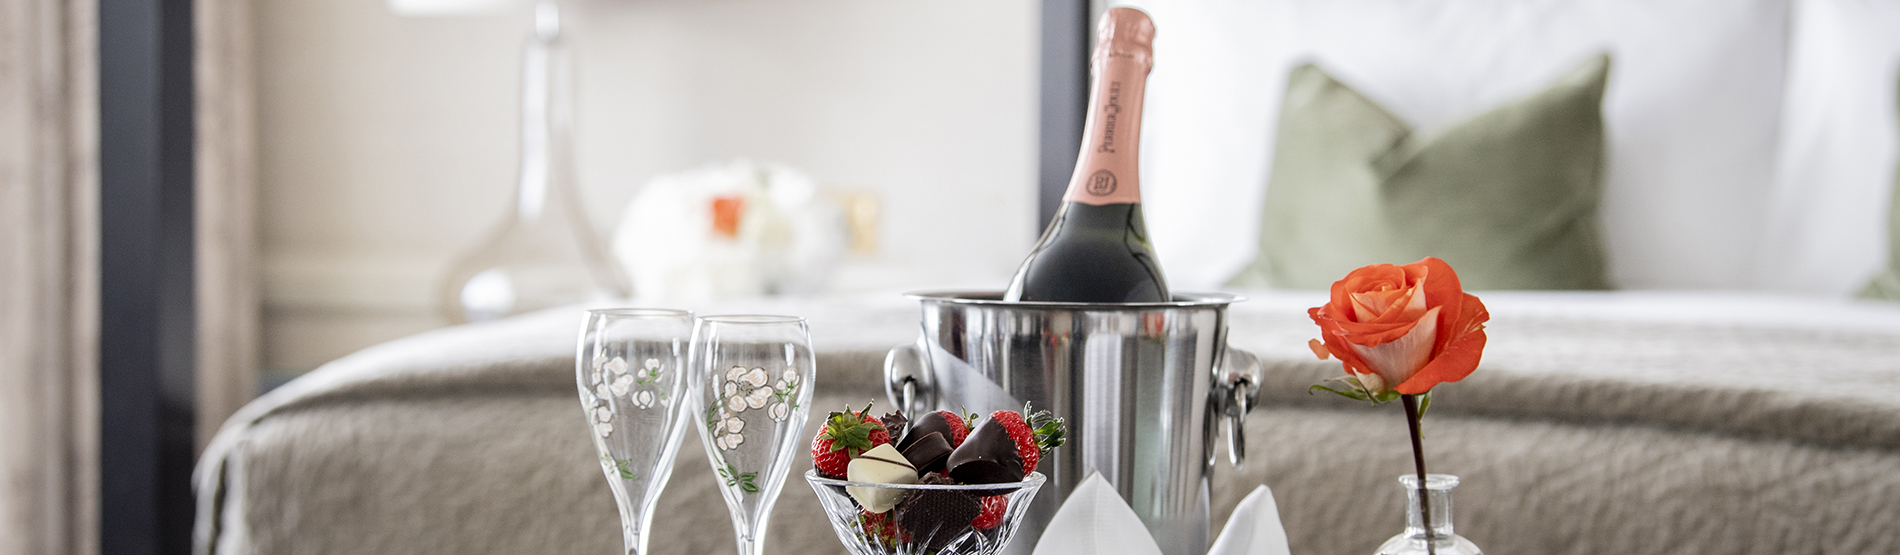 Bedroom with Champagne, chocolate covered strawberries and a rosed